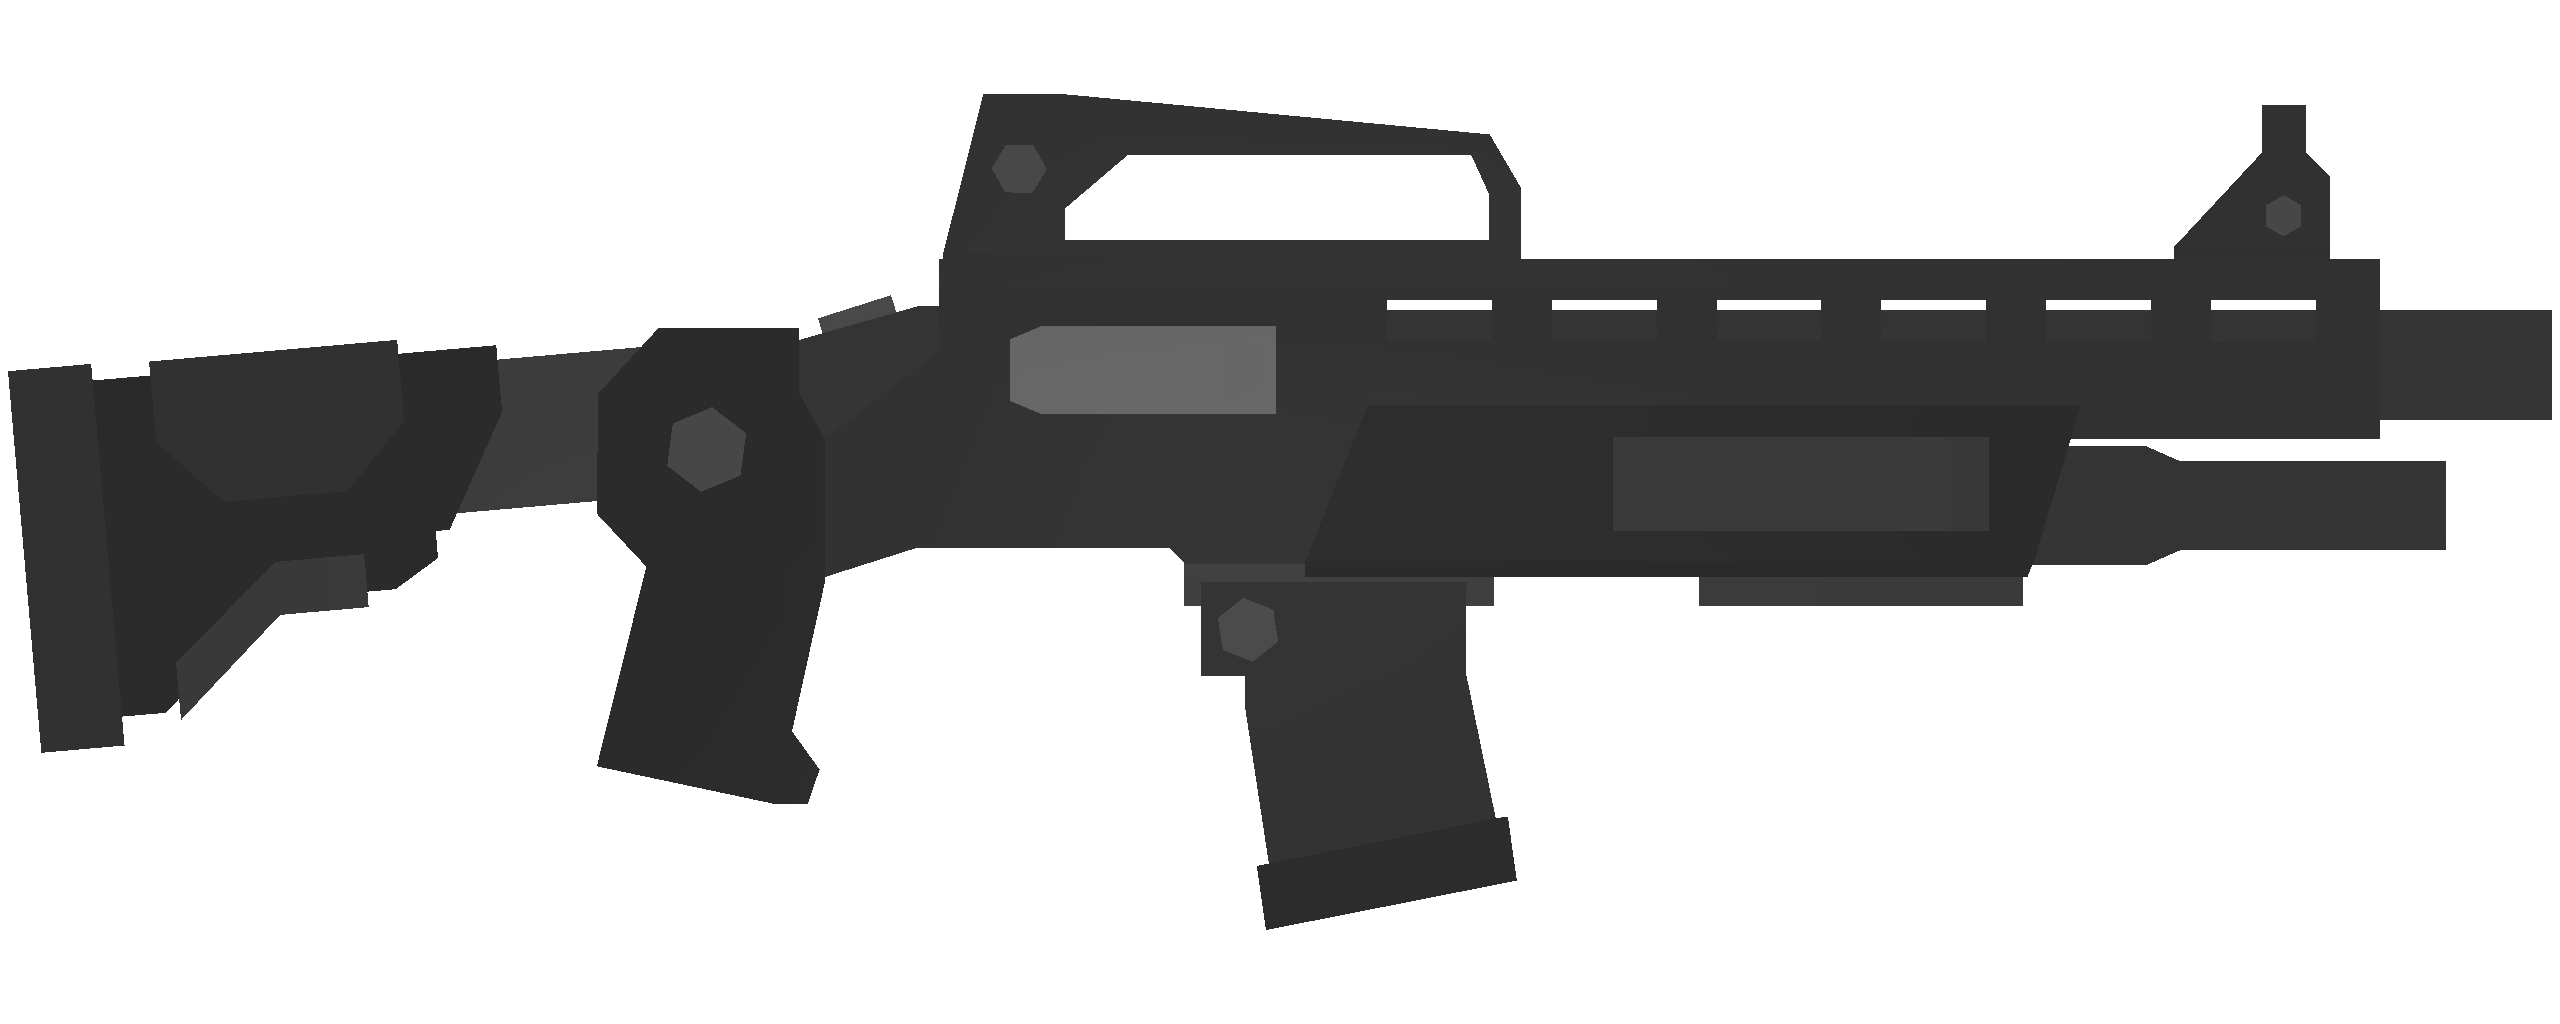 Unturned All ID lists for Magazines and Attachments - Kuwait Items Redux - Shotguns - EF3FBC6